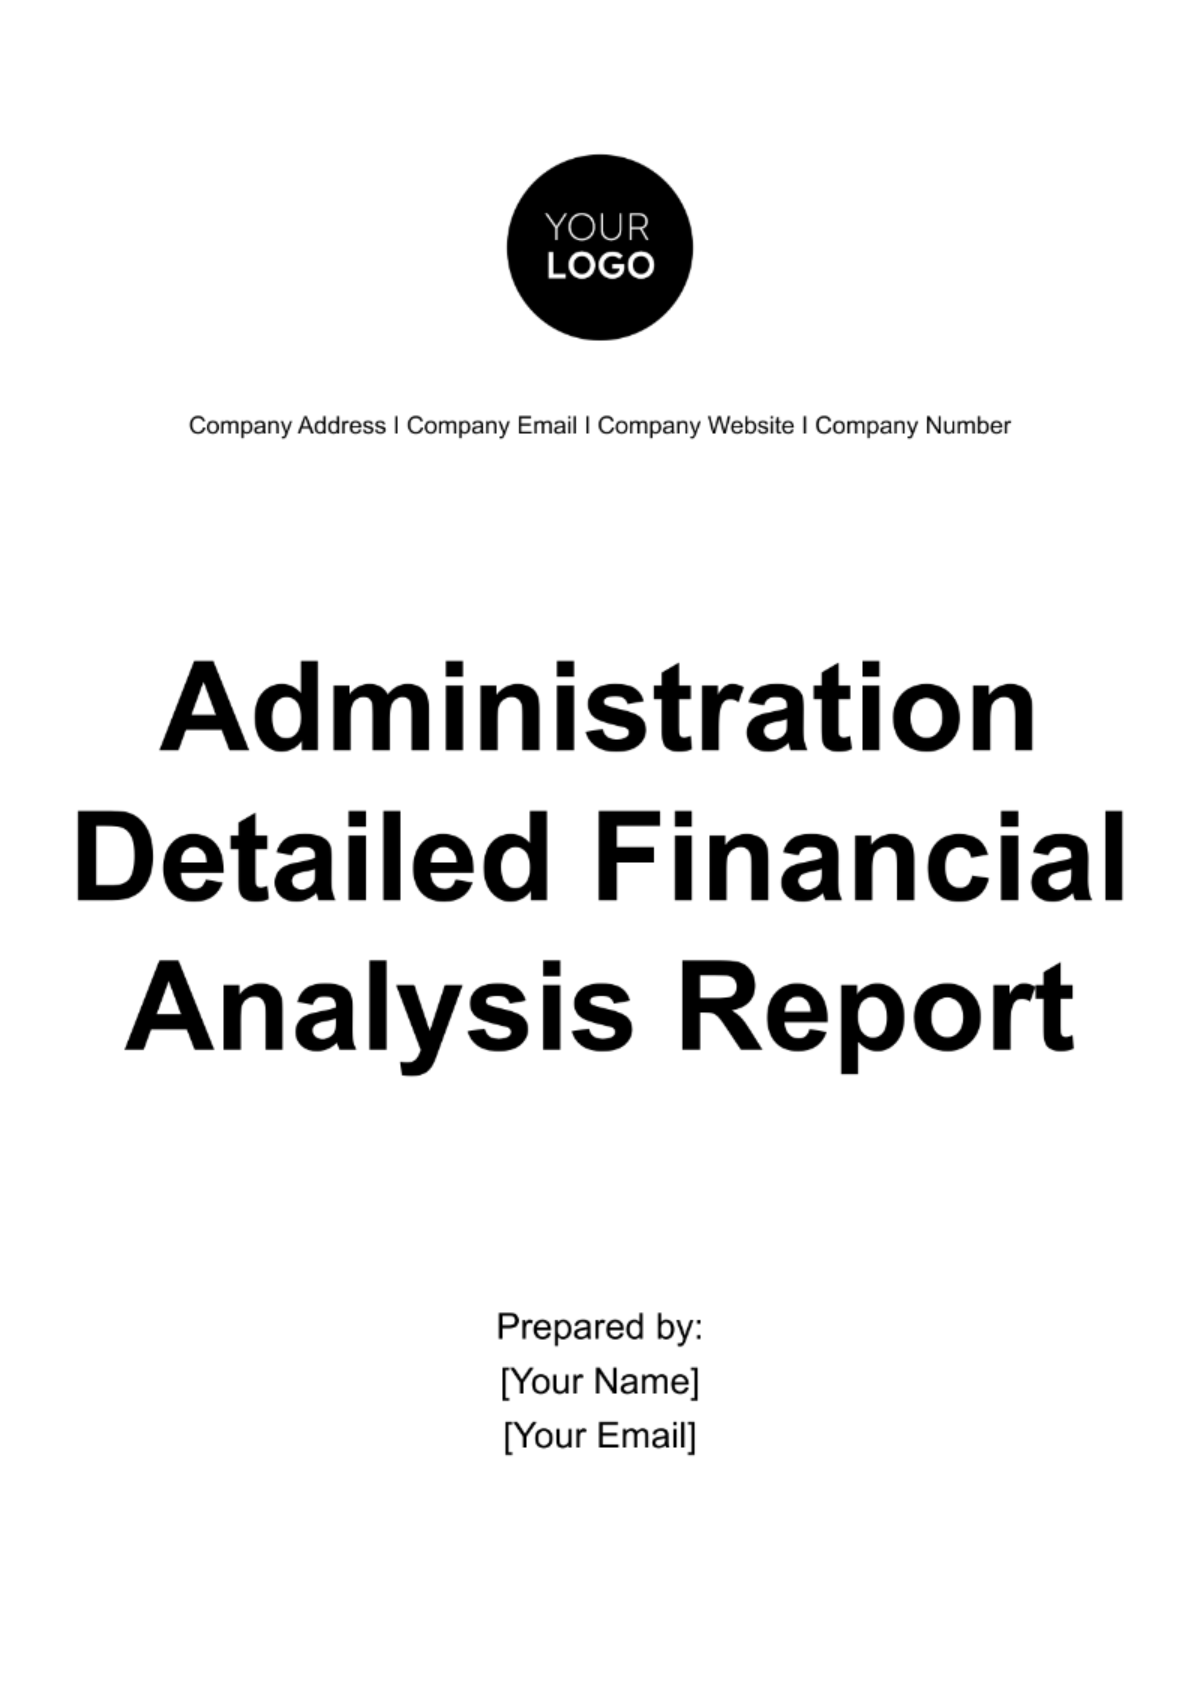 Free Administration Detailed Financial Analysis Report Template